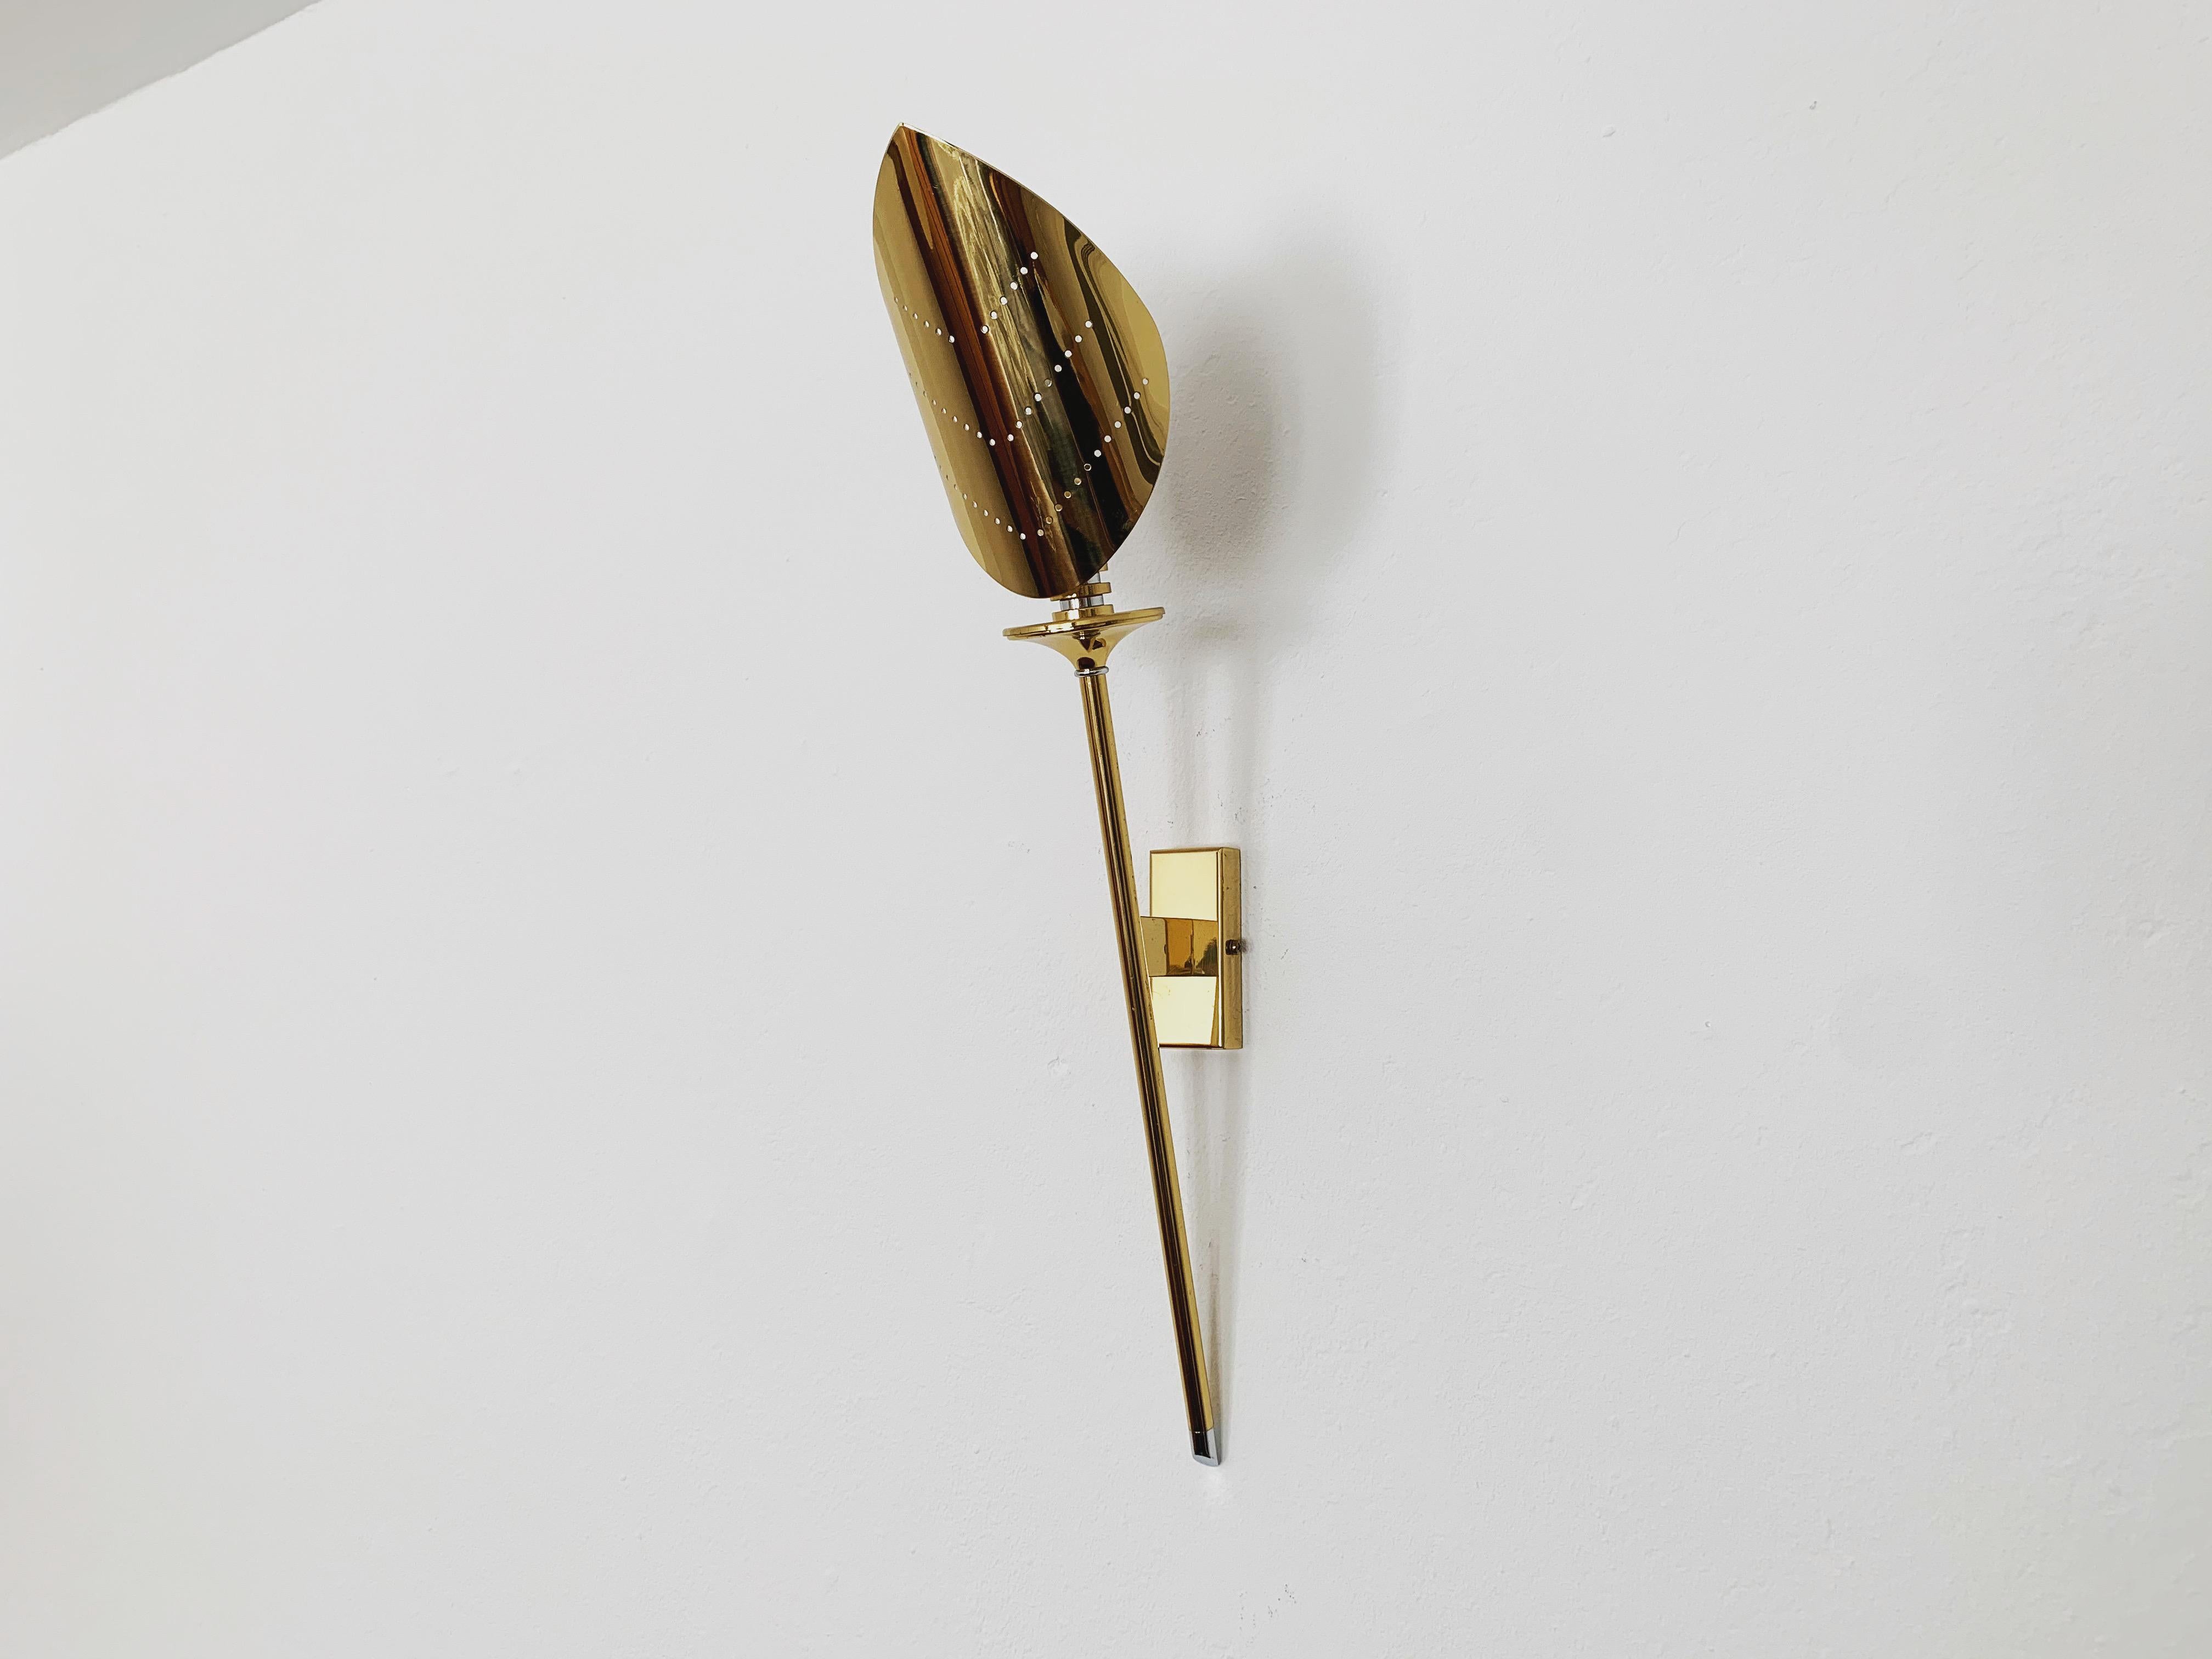 Beautiful wall lamp from the 1980s.
Impressive design and high-quality, very solid workmanship.
The design and the brass create a spectacular light.

Condition:

Very good vintage condition with slight signs of wear consistent with age.

The